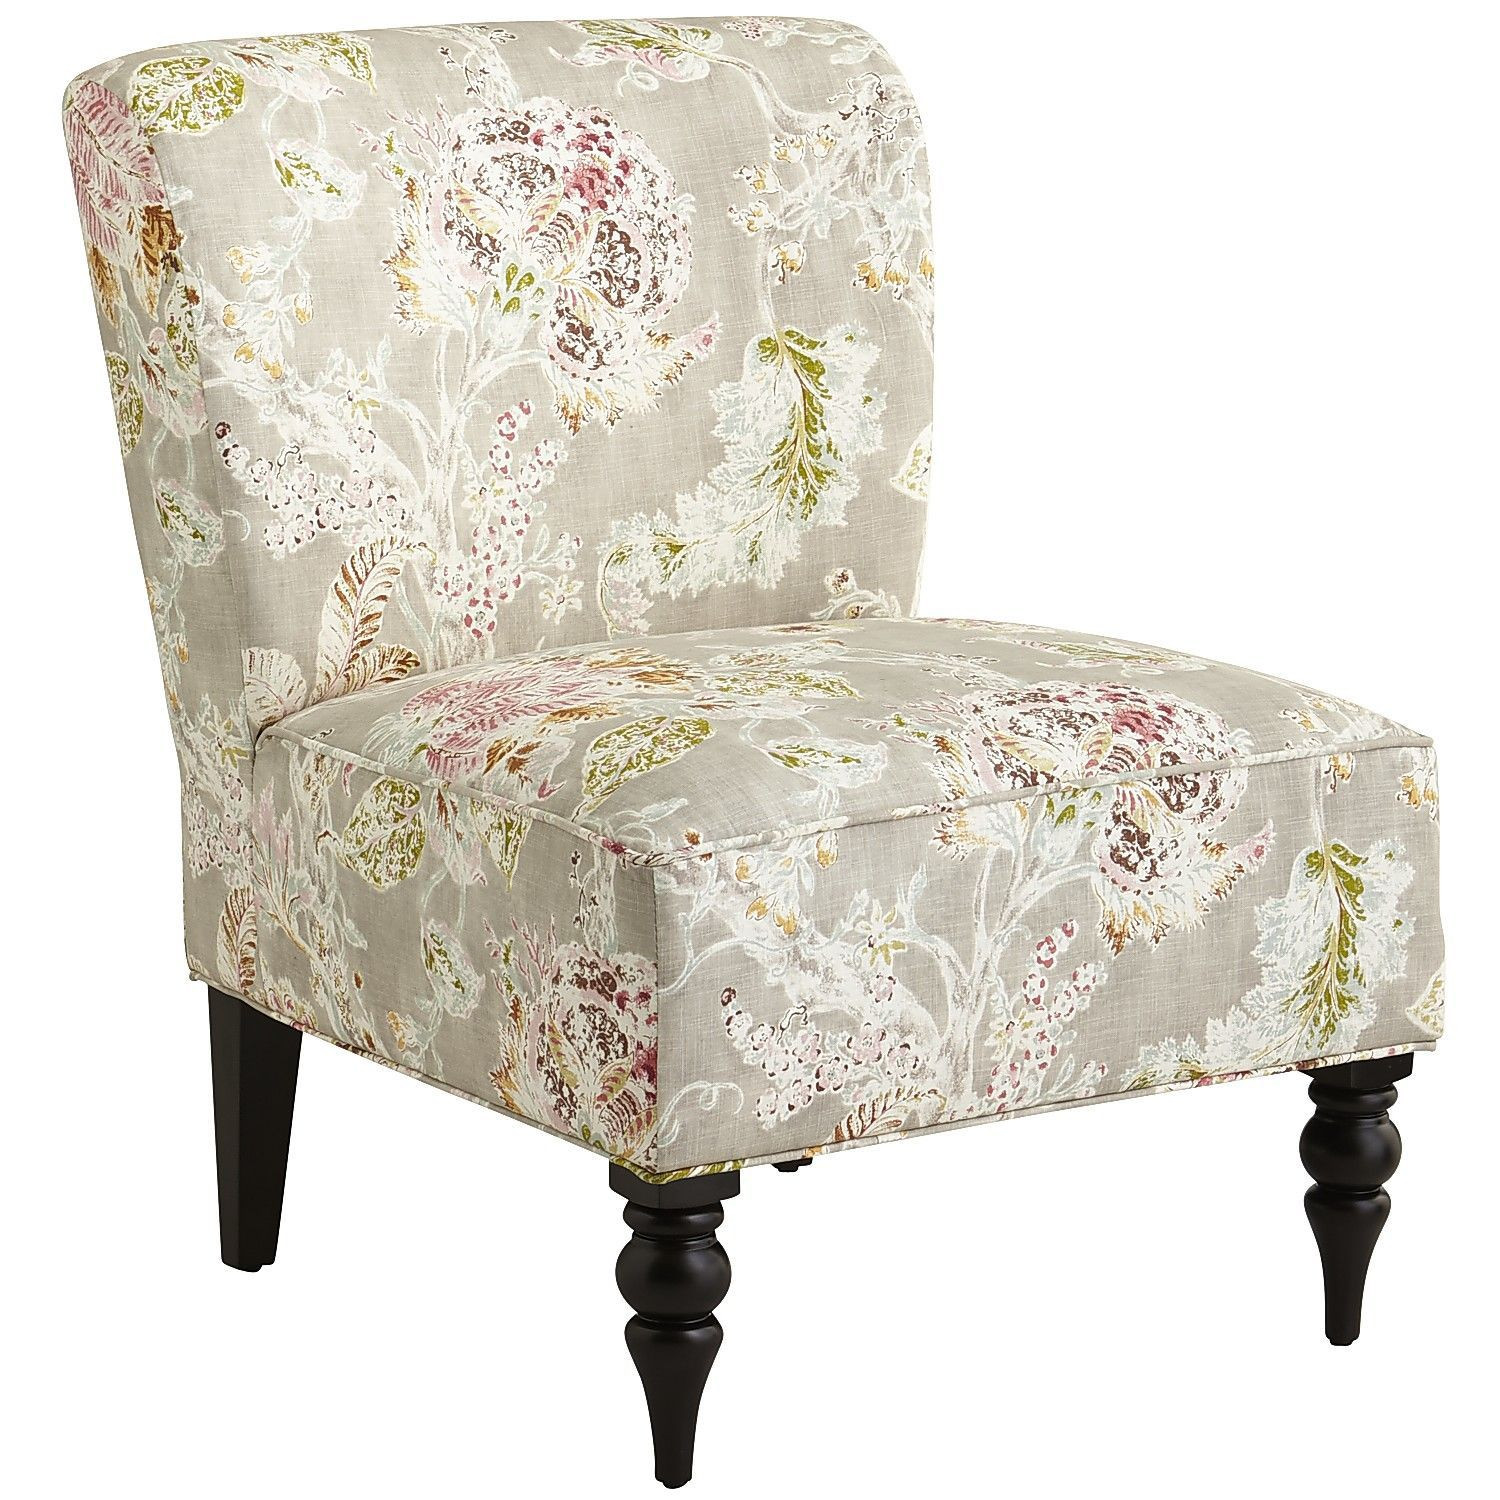 Pier One Living Room Chairs
 Living Room Addyson Chair Garden Dew